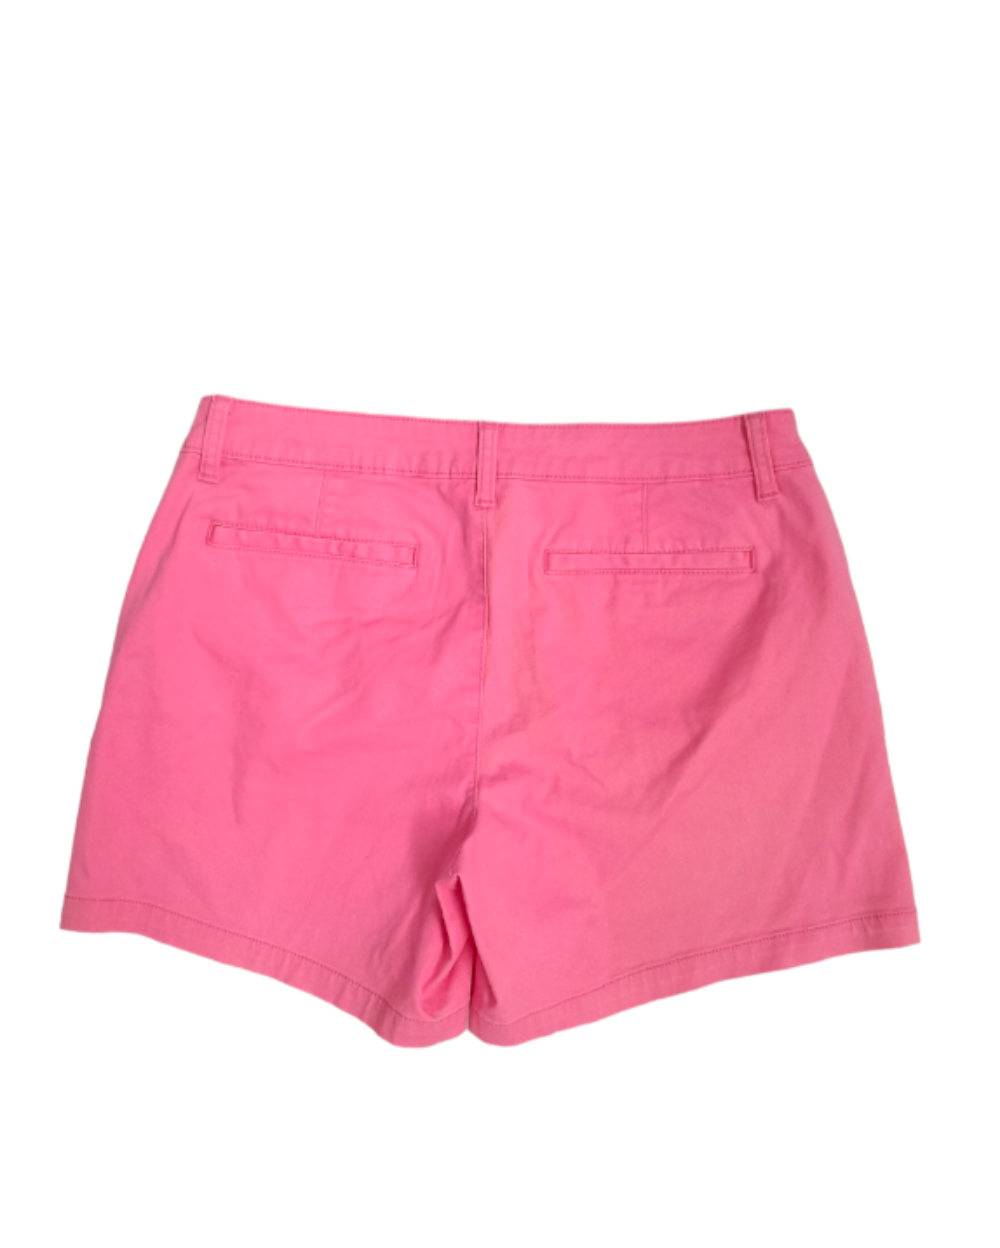 Shorts Casuales Ana a new approach